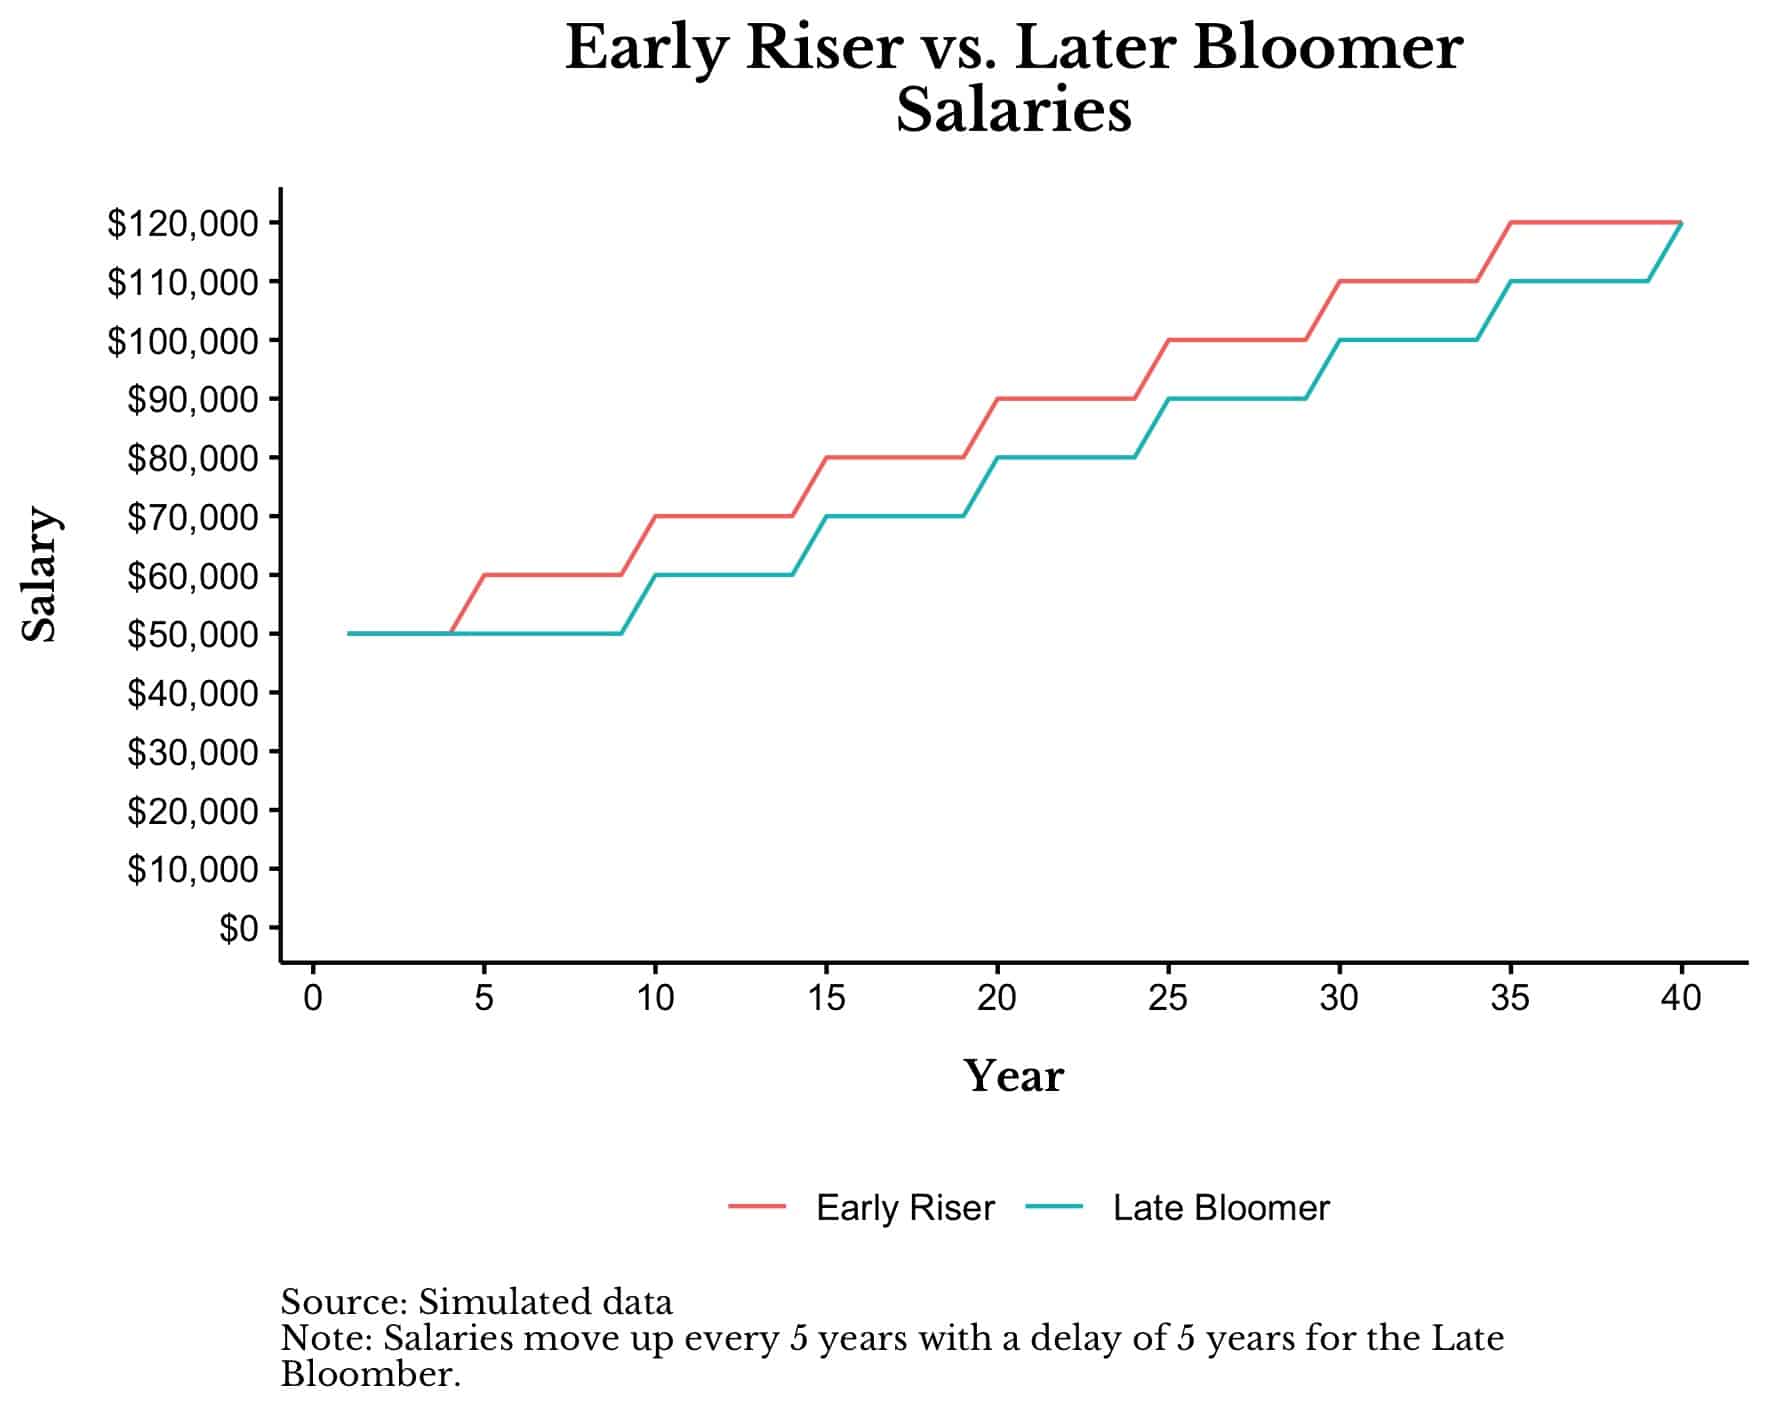 Early riser vs later bloomer salaries